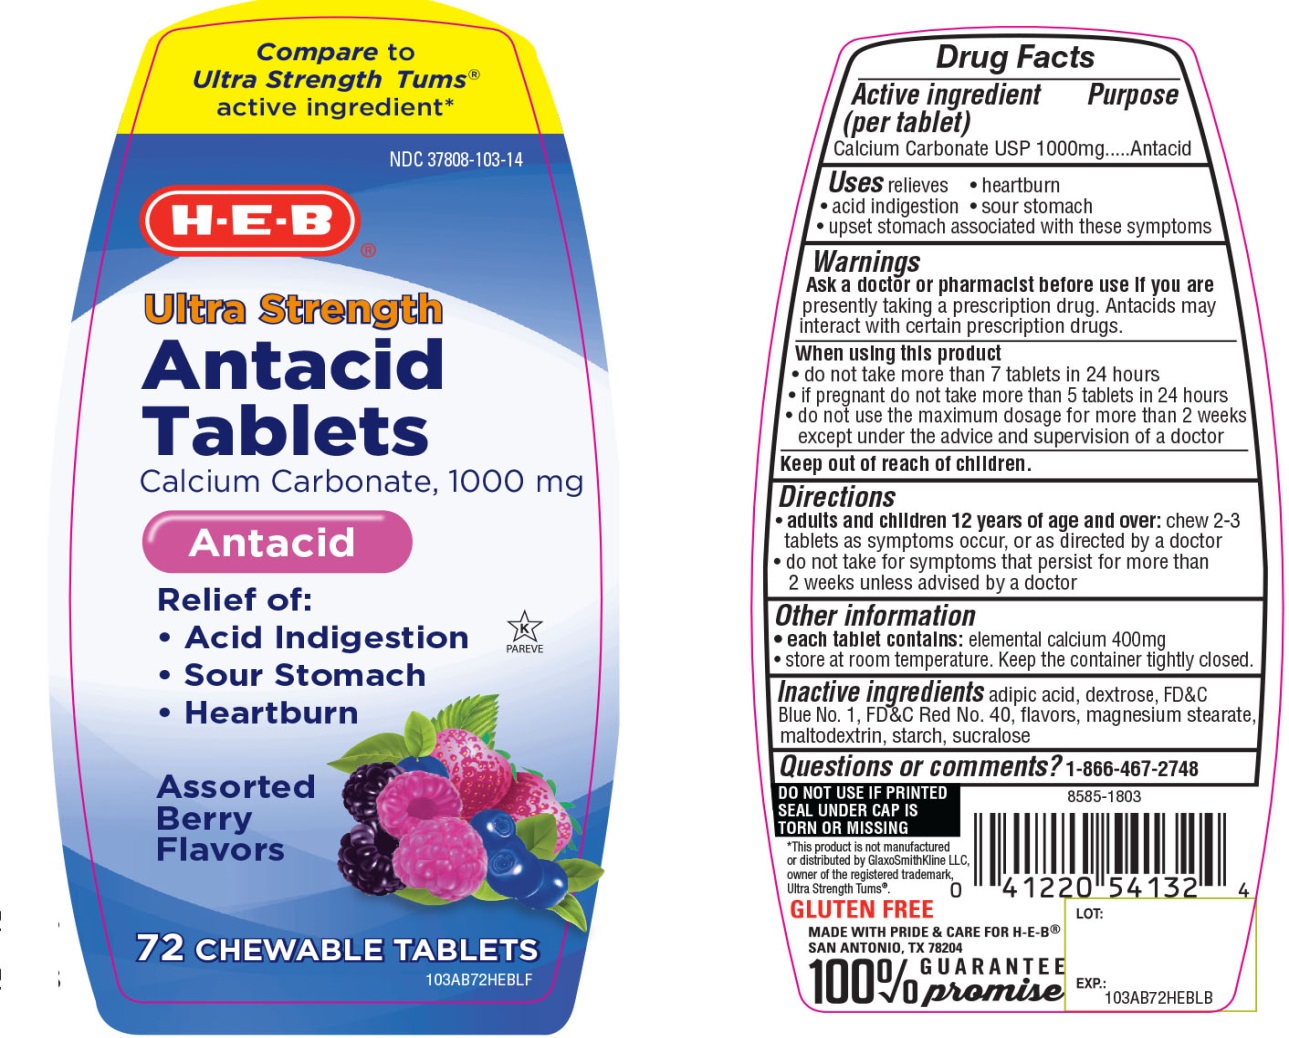 HEB ULTRA STRENGTH ANTACID Aoorted Berry Chewable Tablets